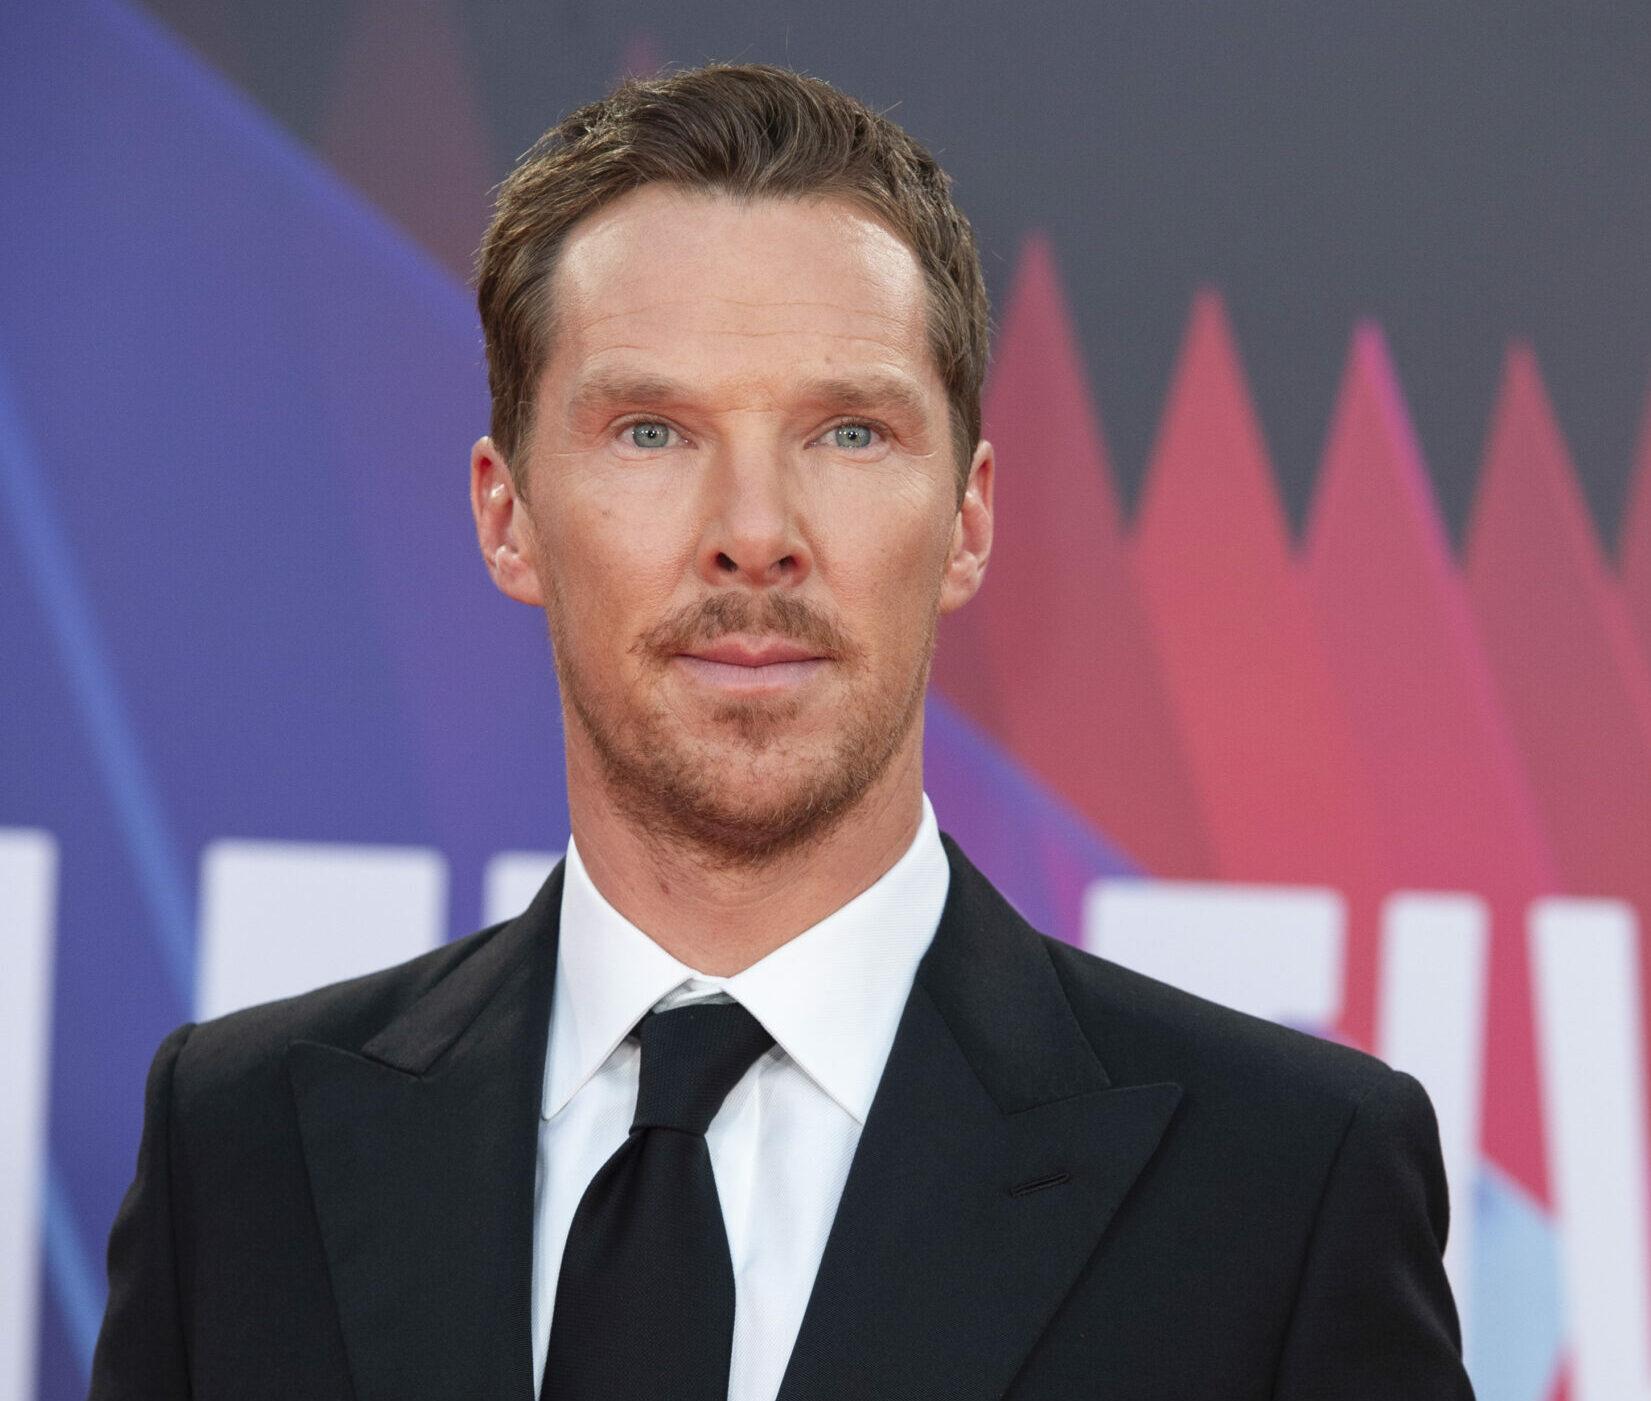 The Power of the Dog Film Premiere, Benedict Cumberbatch 